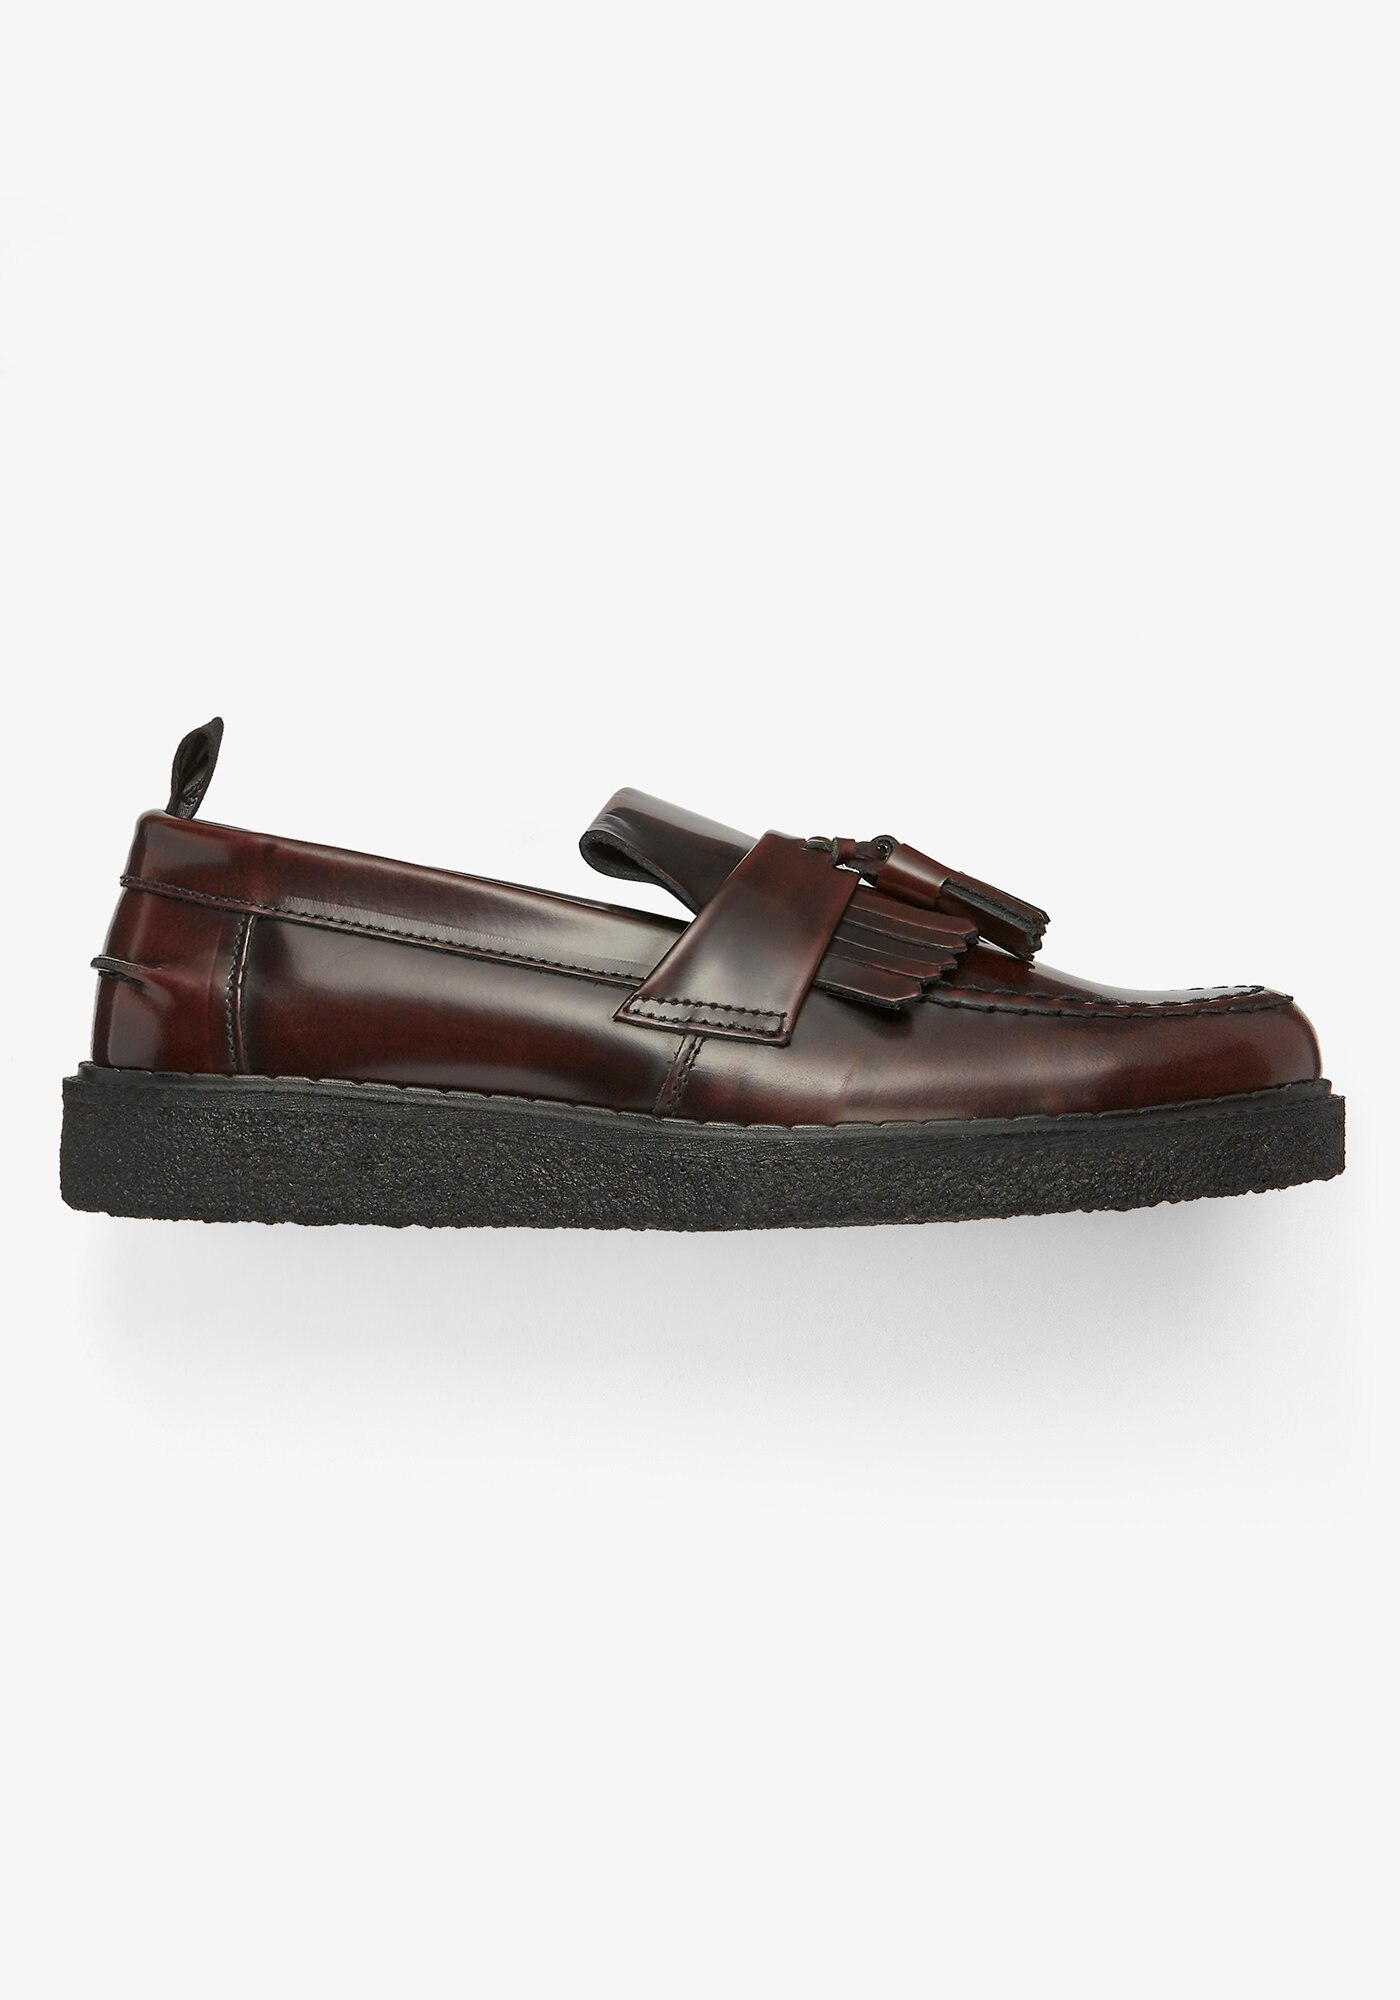 FRED PERRY GEORGE COX TASSEL LOAFER|FRED PERRY(フレッドペリー)の ...